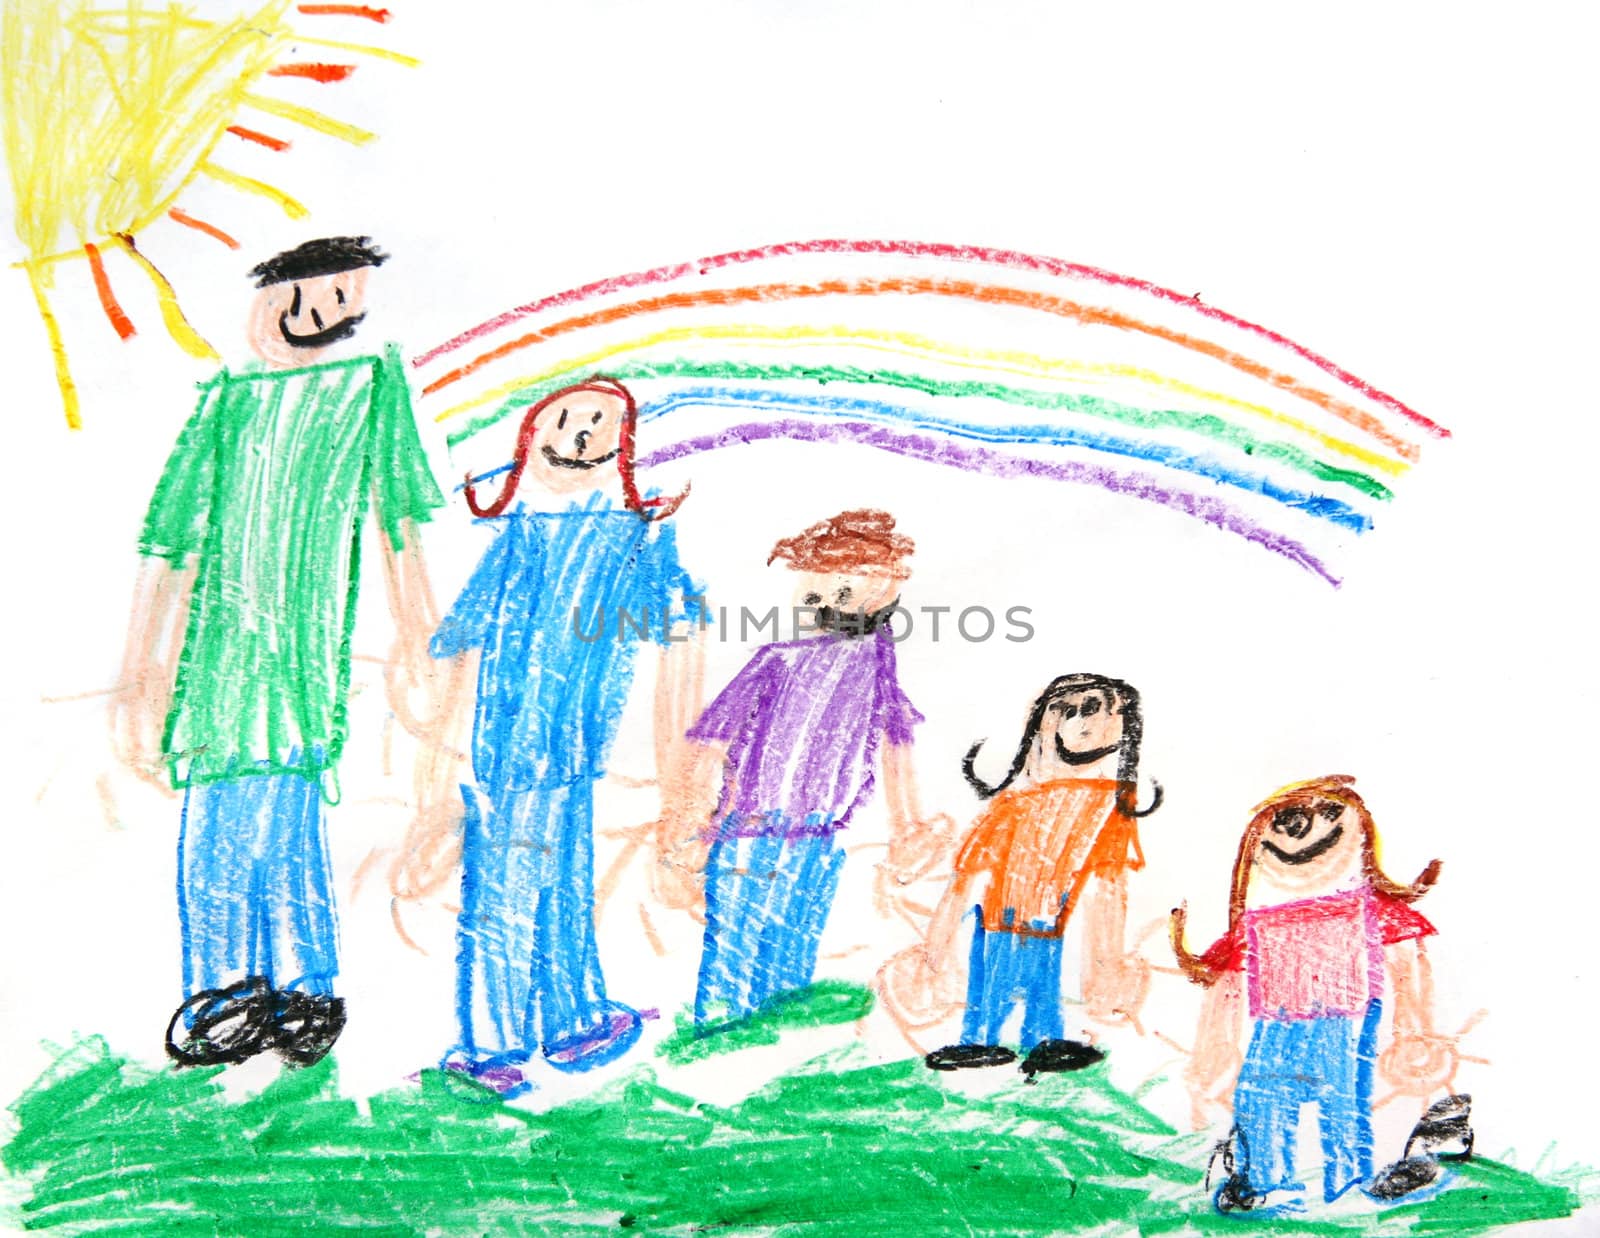 Childs Primitive Crayon Drawing of a Family of 5 People With a Sun and Rainbow